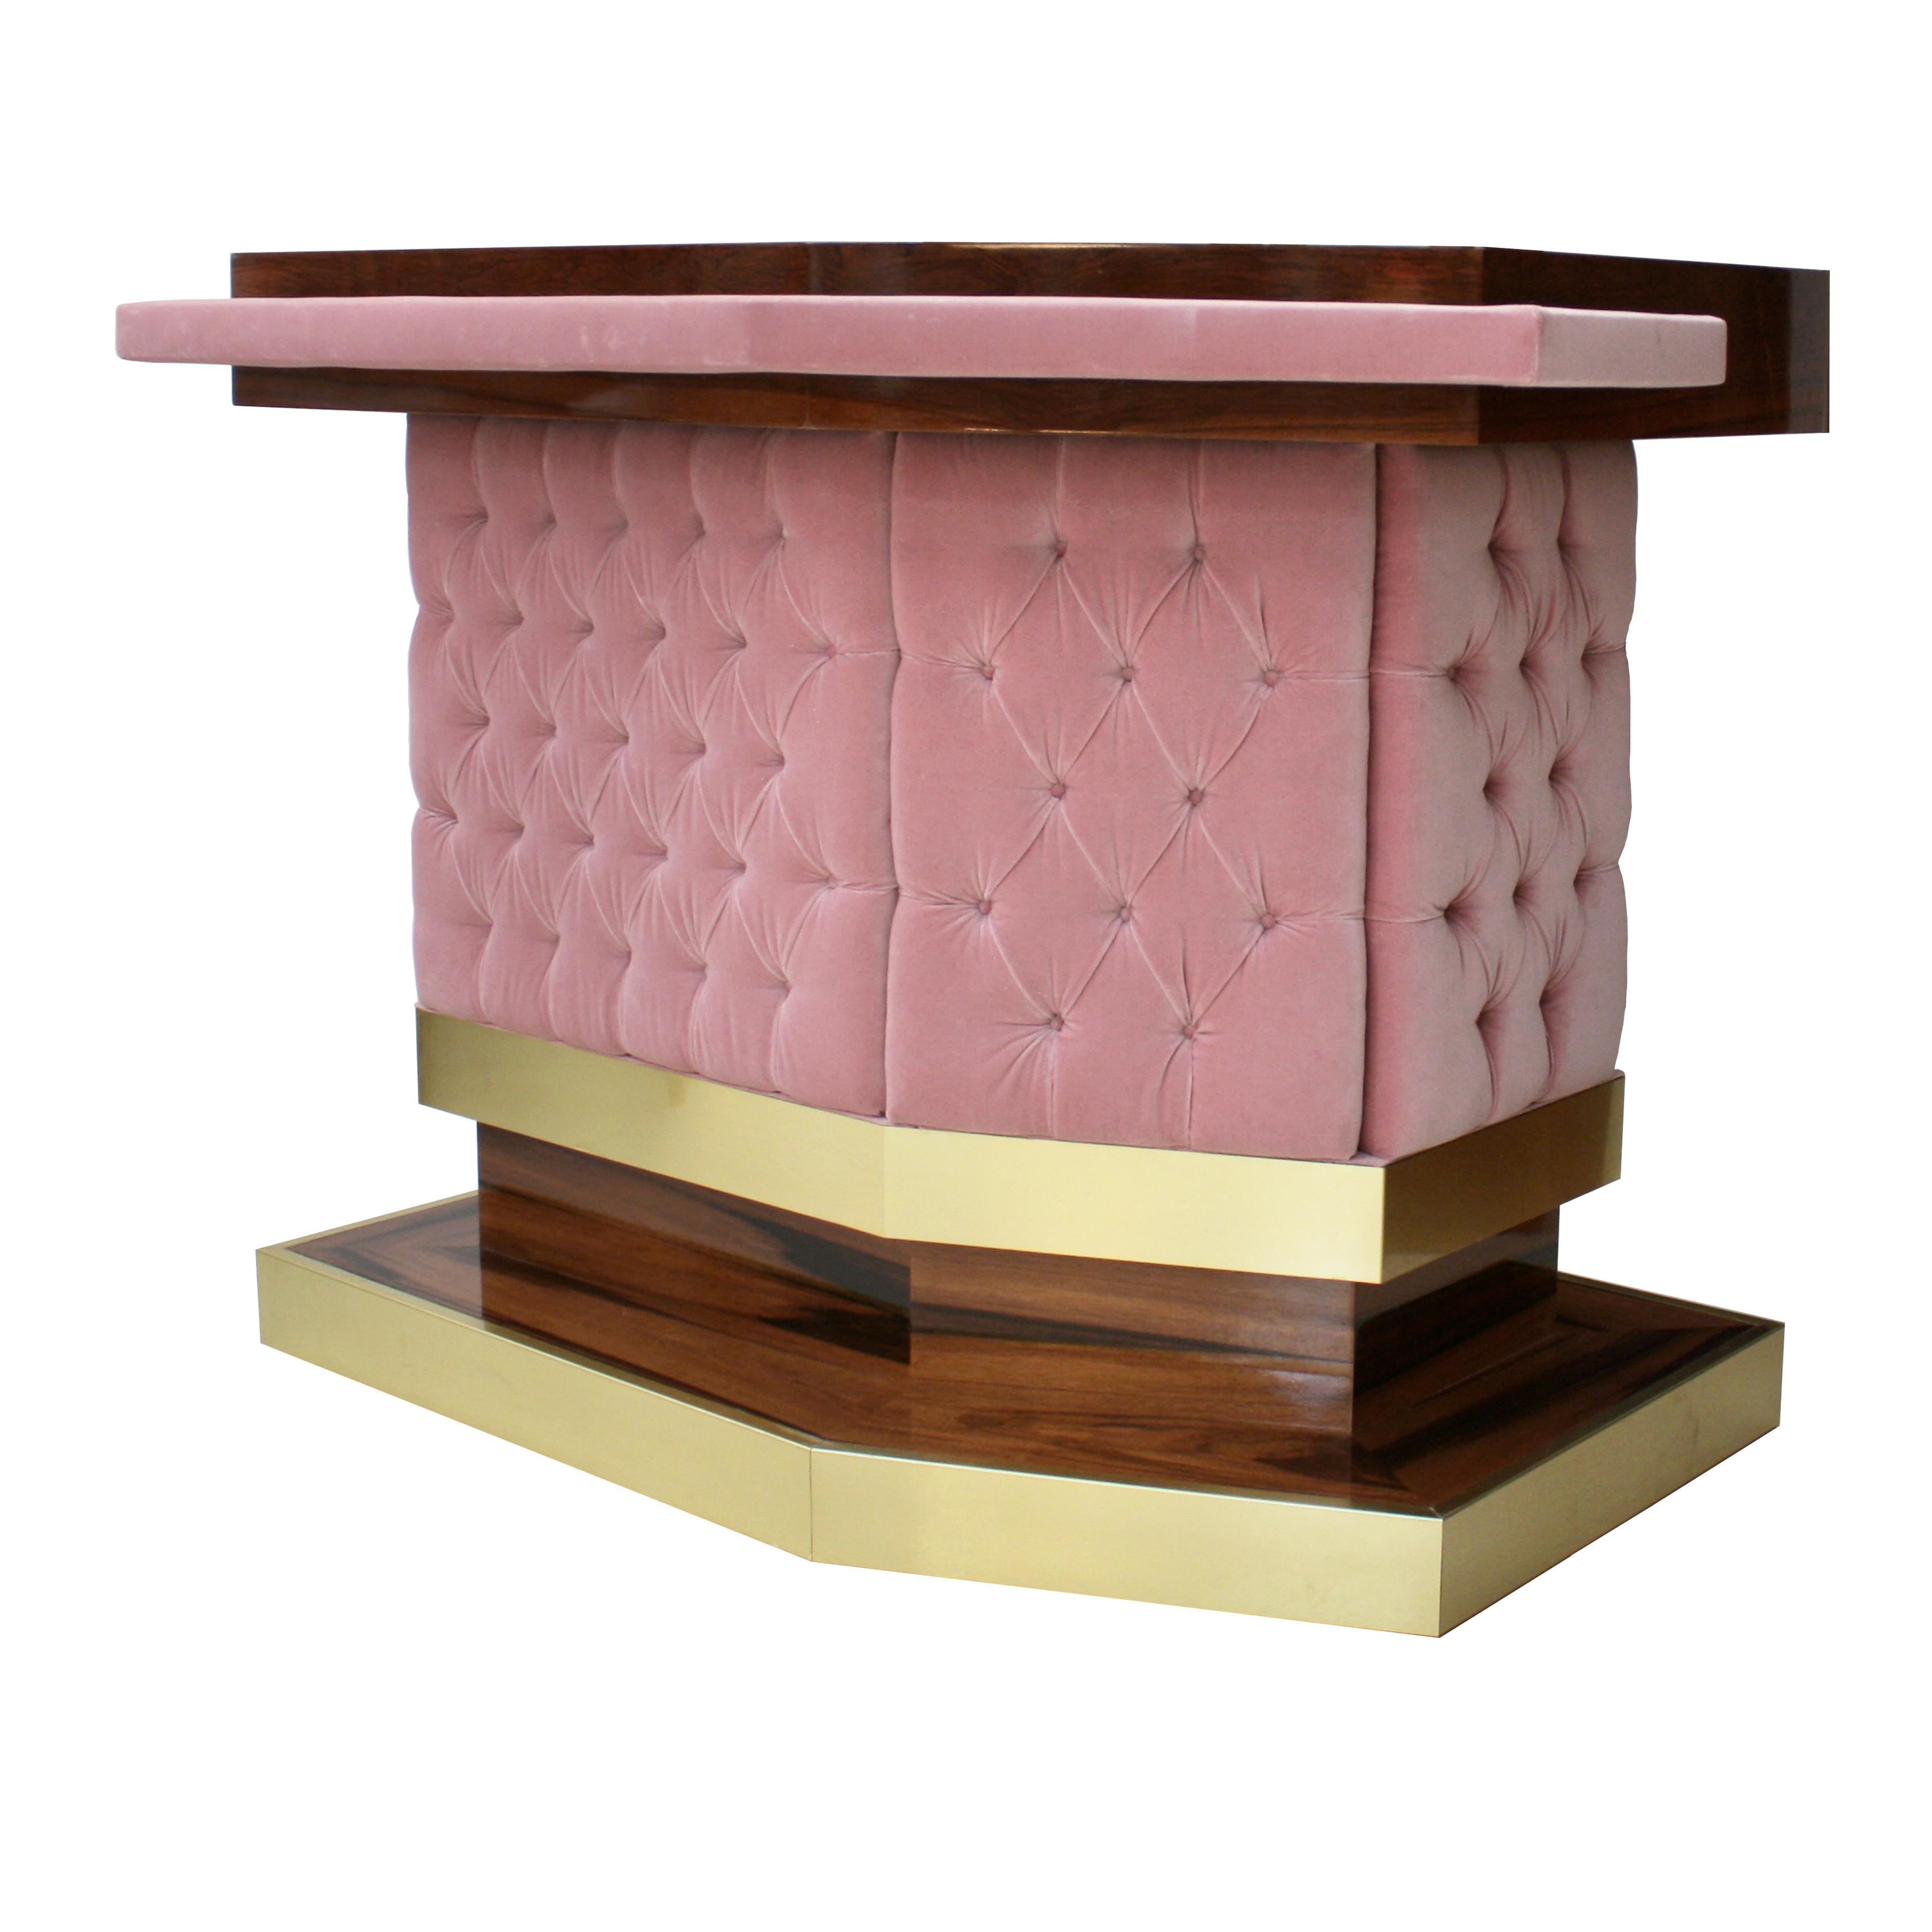 A wonderful mid-century style Bar counter designed by L.A. Studio Interiorismo, made of solid wood covered with high gloss wood veneer in L-shape, front surface upholstered in baby pink cotton velvet capitoné and brass details.